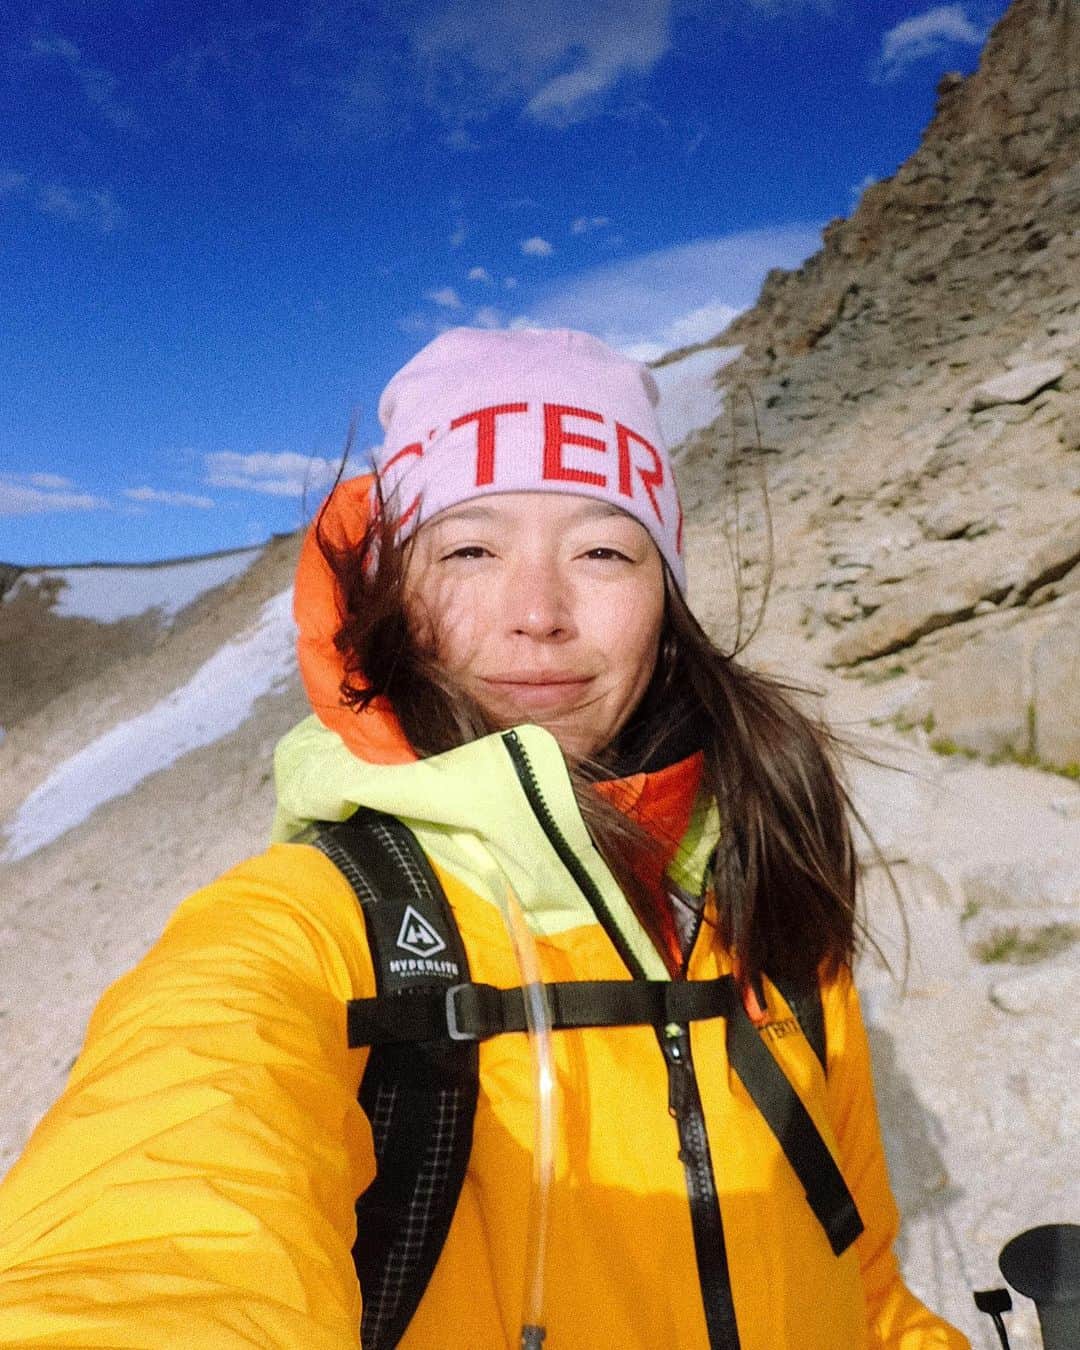 松島エミのインスタグラム：「Mount Langley!  Exactly 1 year ago I did my first backpacking trip which was Mount Whitney. That experience had such an impact on me that it made me want to go and climb and experience as many mountains as I can within my abilities and time that I have. Be it on foot, ski or climbing. A lot of the time you are not able to complete your mission/goal because there is so much that influences the outcome other than your initial curiosity and want to do something.   This time it was unexpected bad weather. (Maybe most of the time haha) the winds were so strong with even stronger gusts that we were struggling to walk straight, being blown to the side between each step. Shoutout to Renee who called it while it took me a little while to accept it. We were already at 3700m and just 3km from the summit which was in sight so it was extra hard to turn around.  Soon after we turned around dark clouds started rolling in at crazy speeds and it was very soon clear we made the right call! Especially still having to pack up camp and then head back to trailhead which still made it a 20km day.  Anyway a little recap of our Langley attempt and and important lesson for not being caught up on the outcome :) Even without summit it was an epic adventure and mountain to be on and excited to try again✨   . . #mountlangley#mtlangley#easternsierras#backpacking#camplife#mountaingirls#girlswhoclimb#california14ers#14ers#arcteryx#gorpcore#hikingpatrol#backcountry#hiking#hikinggear#newarmypass#cottonwoodlakes」